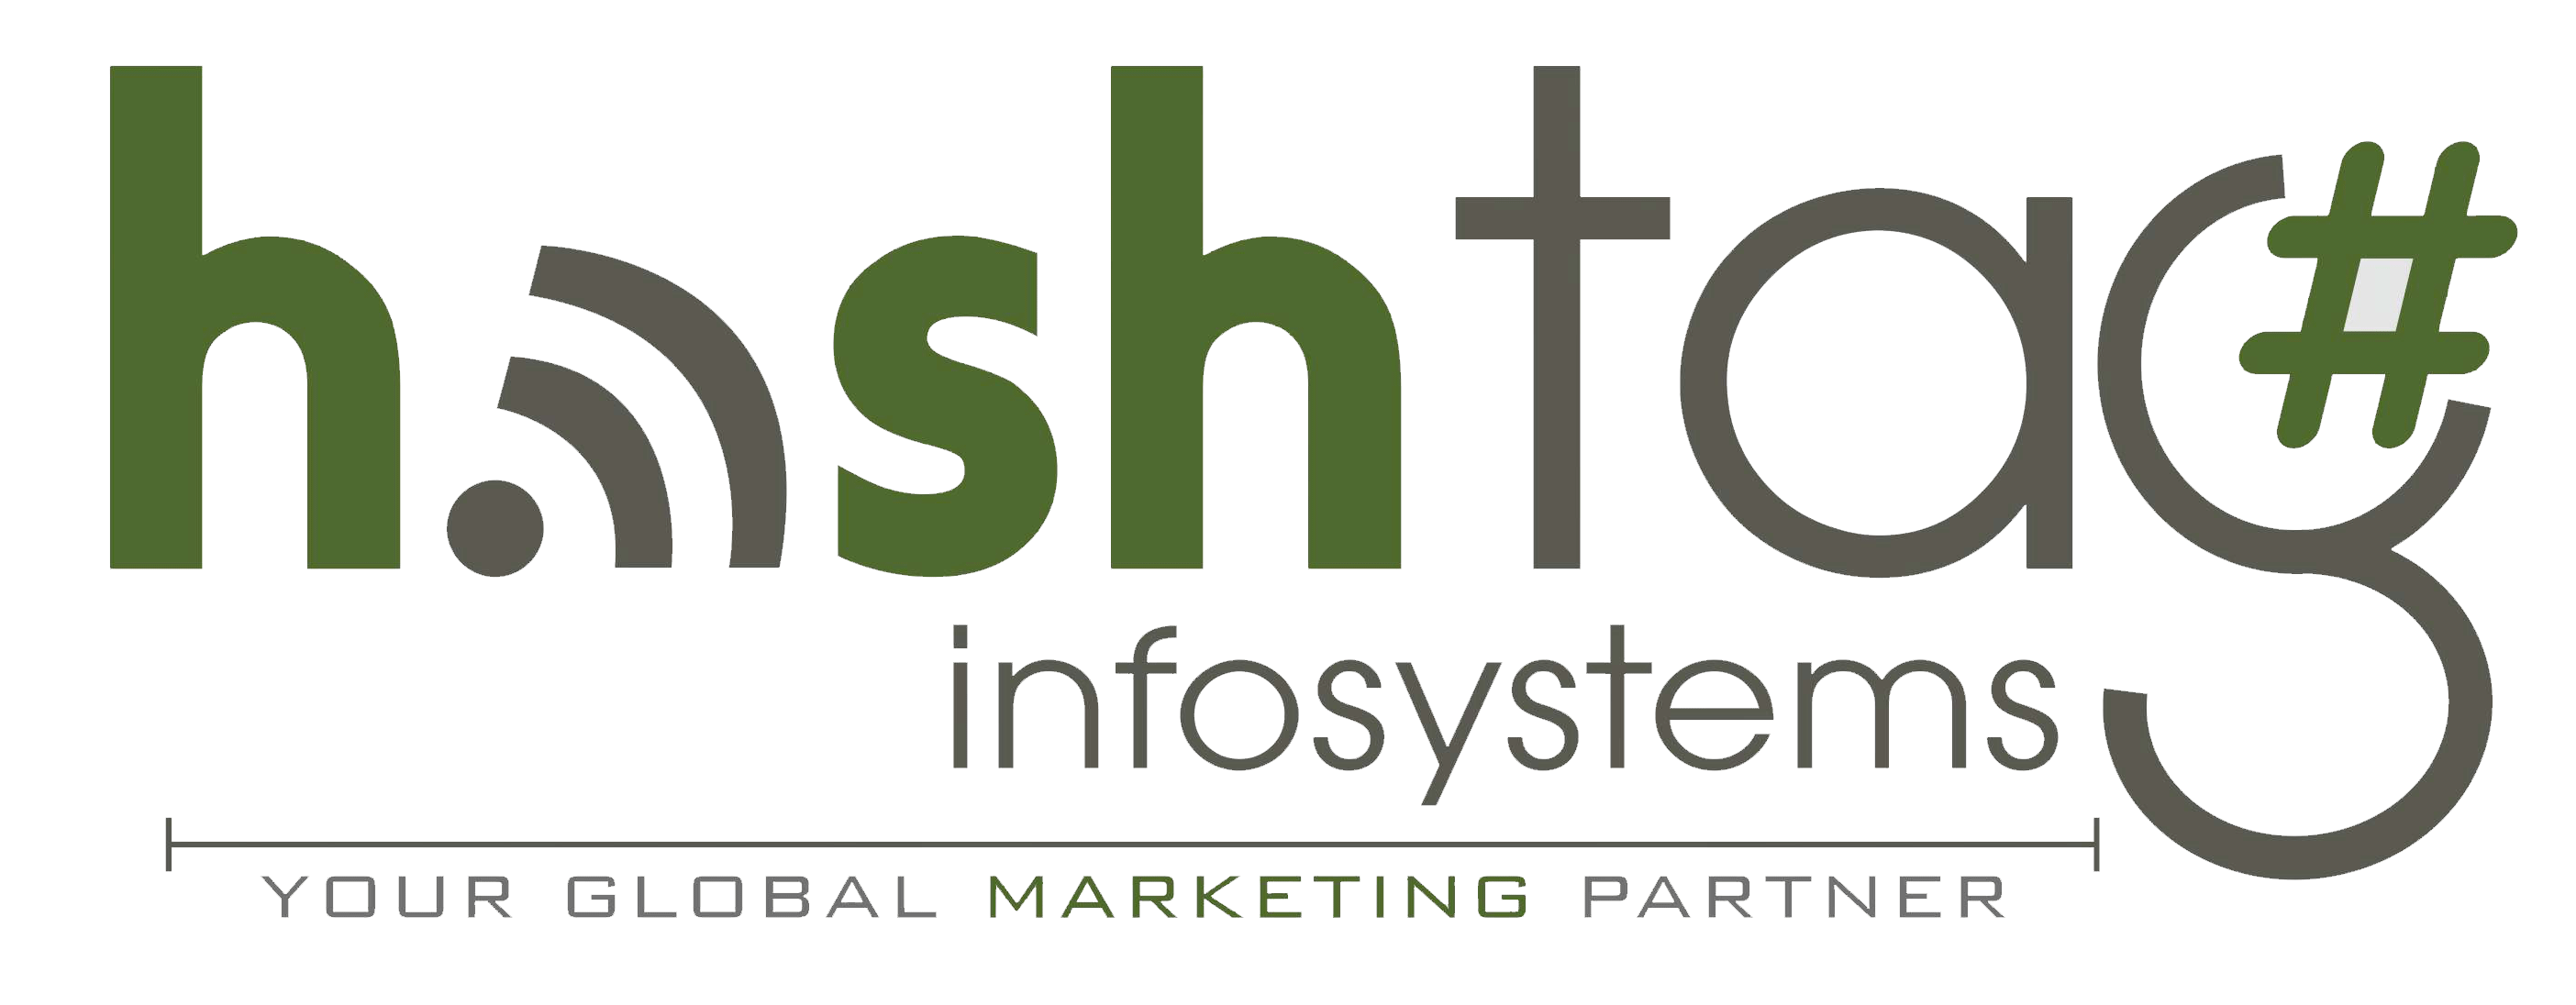 Hashtag Info Systems